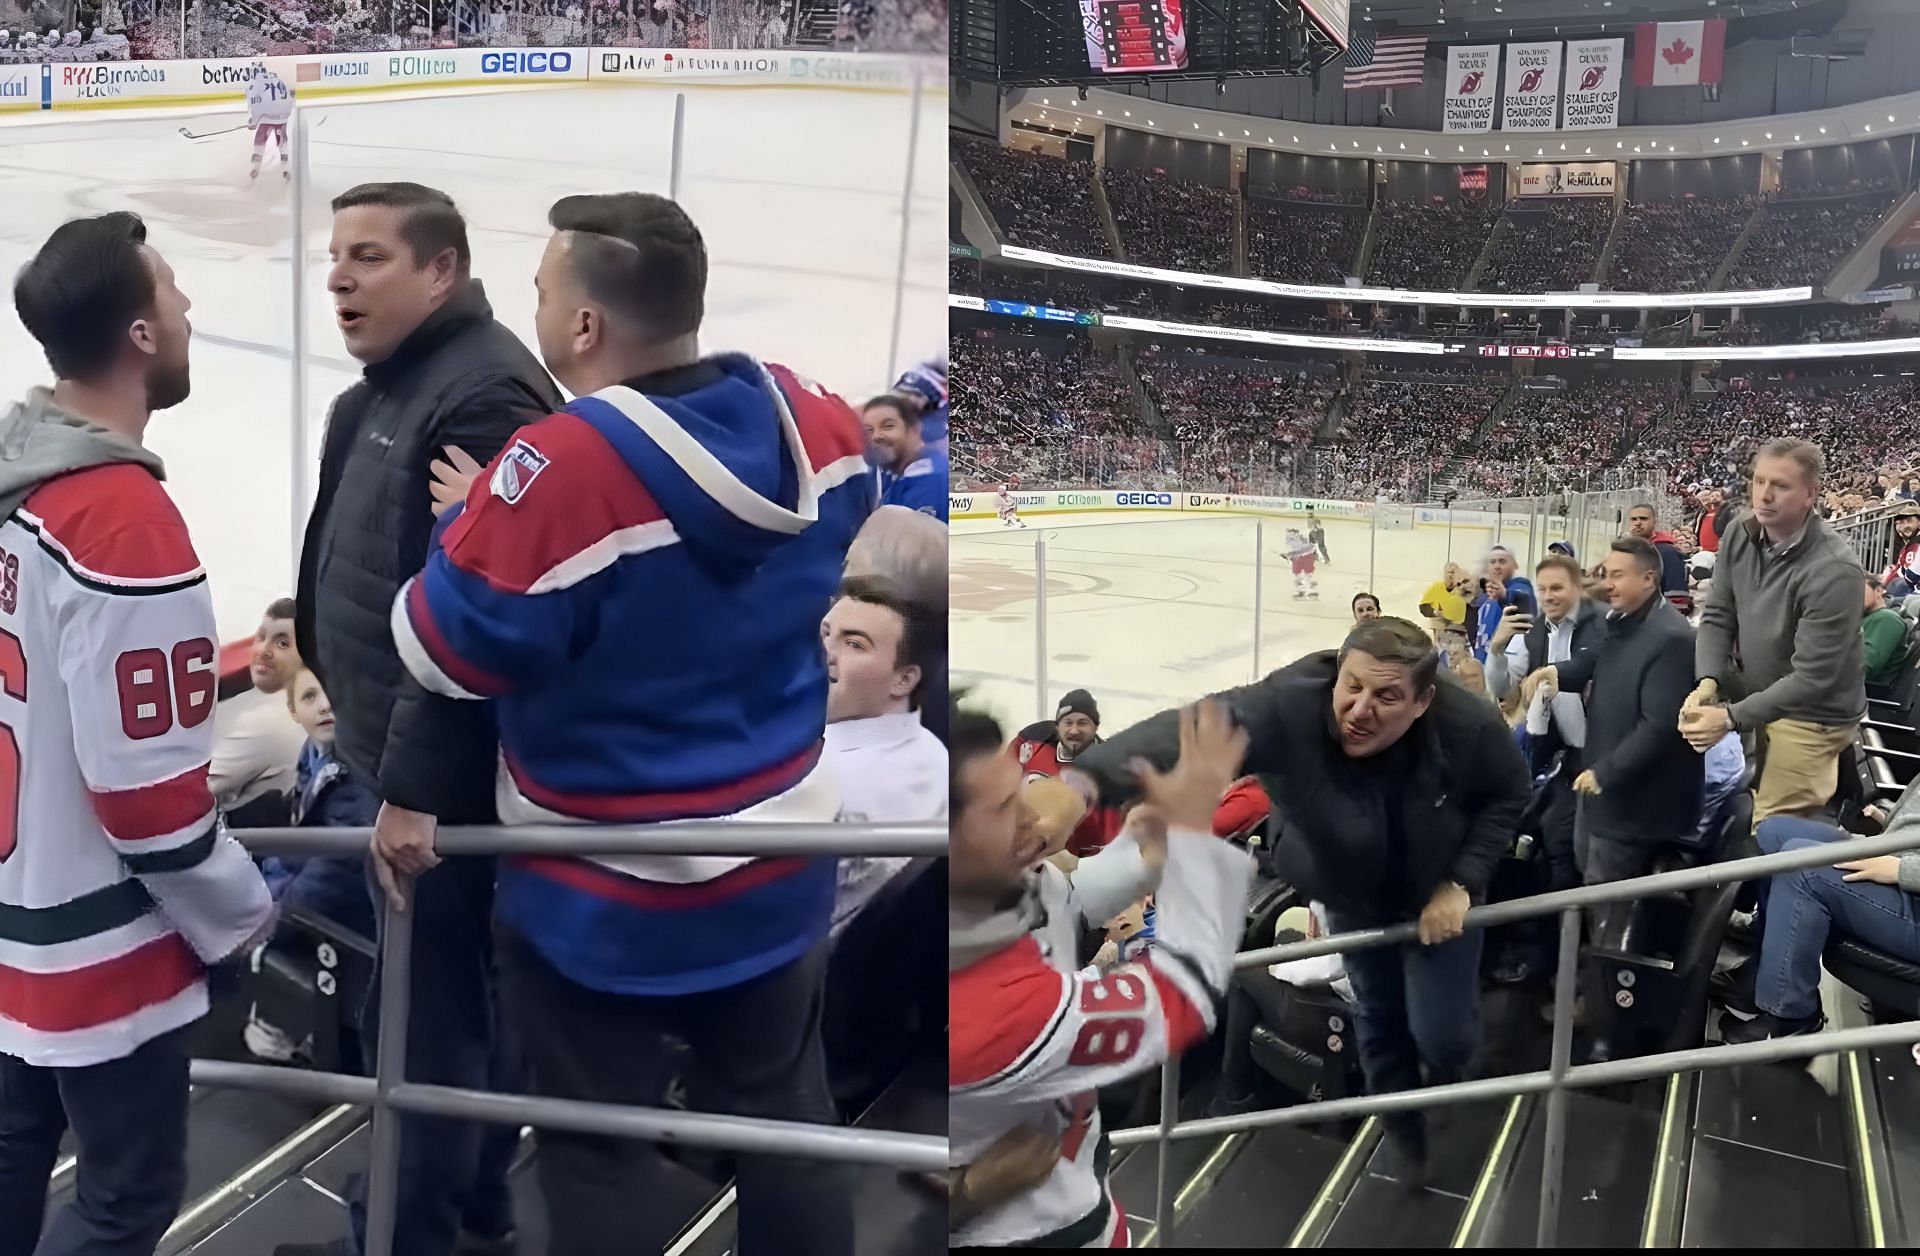 WATCH: Devils fan headbutts and throws punches at another attendee sparking fight